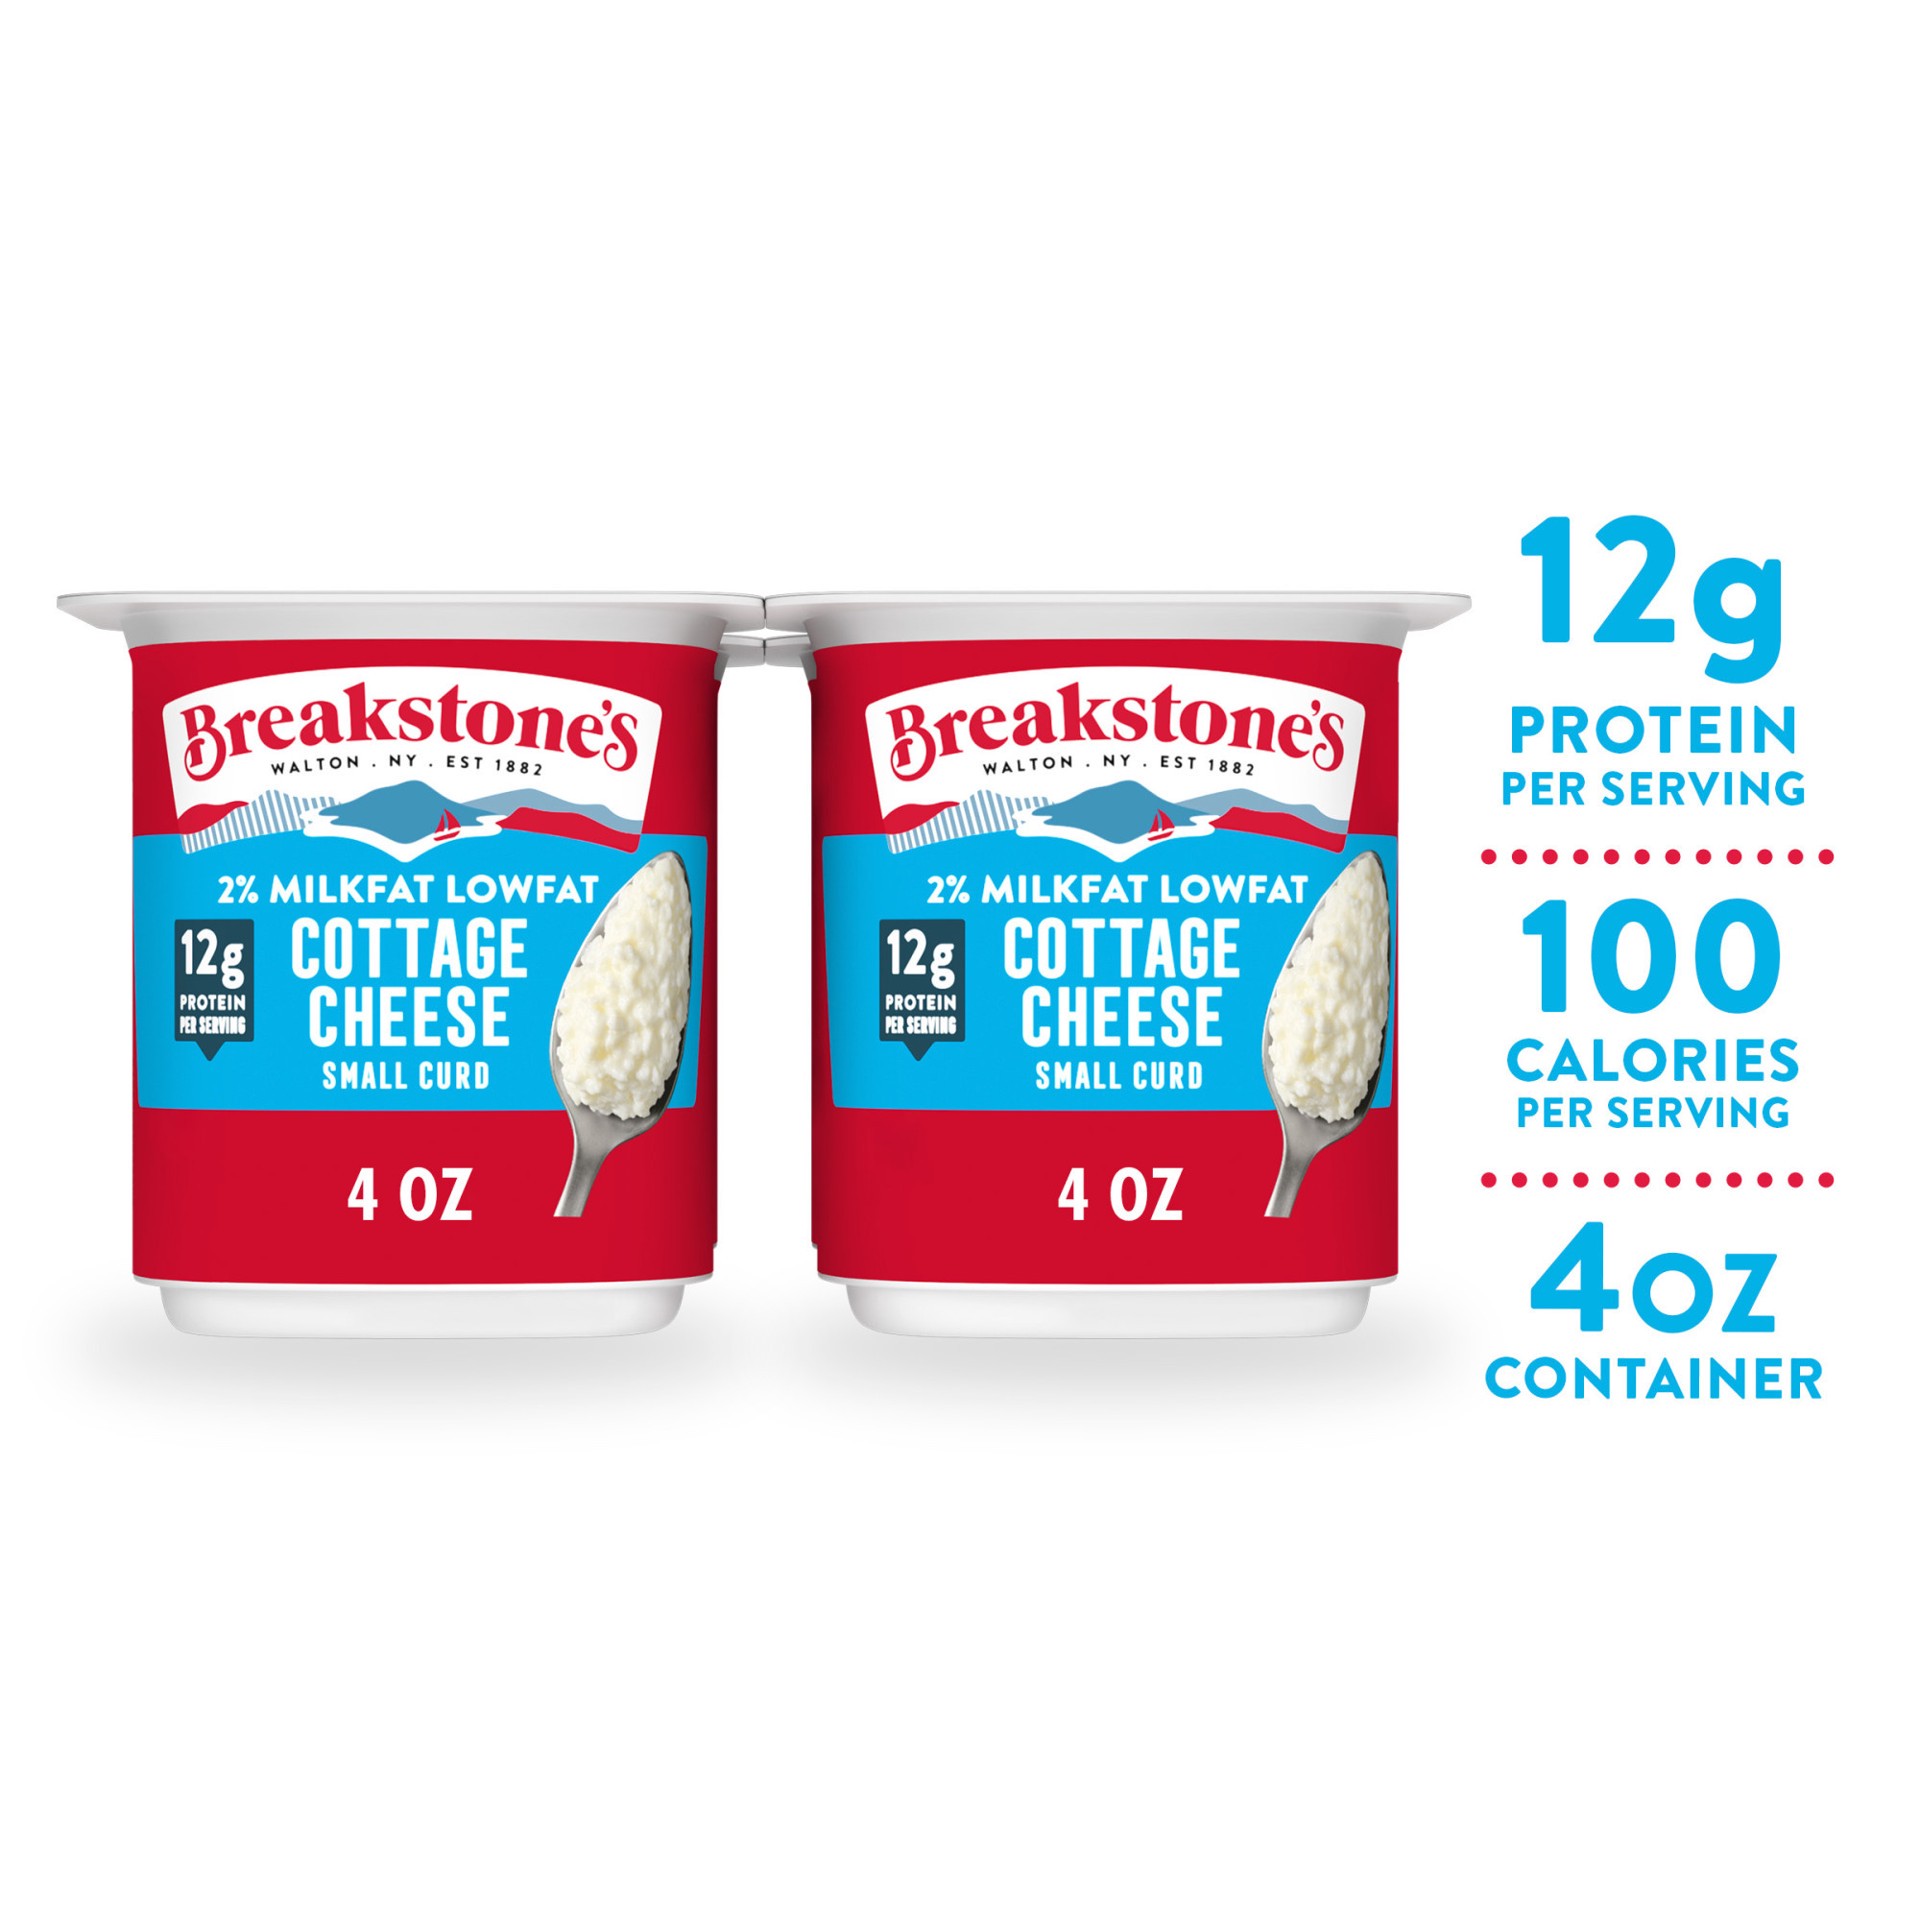 slide 1 of 6, Breakstone's Lowfat Small Curd Cottage Cheese with 2% Milkfat, 4 oz Cup, 4 Ct, 453 g